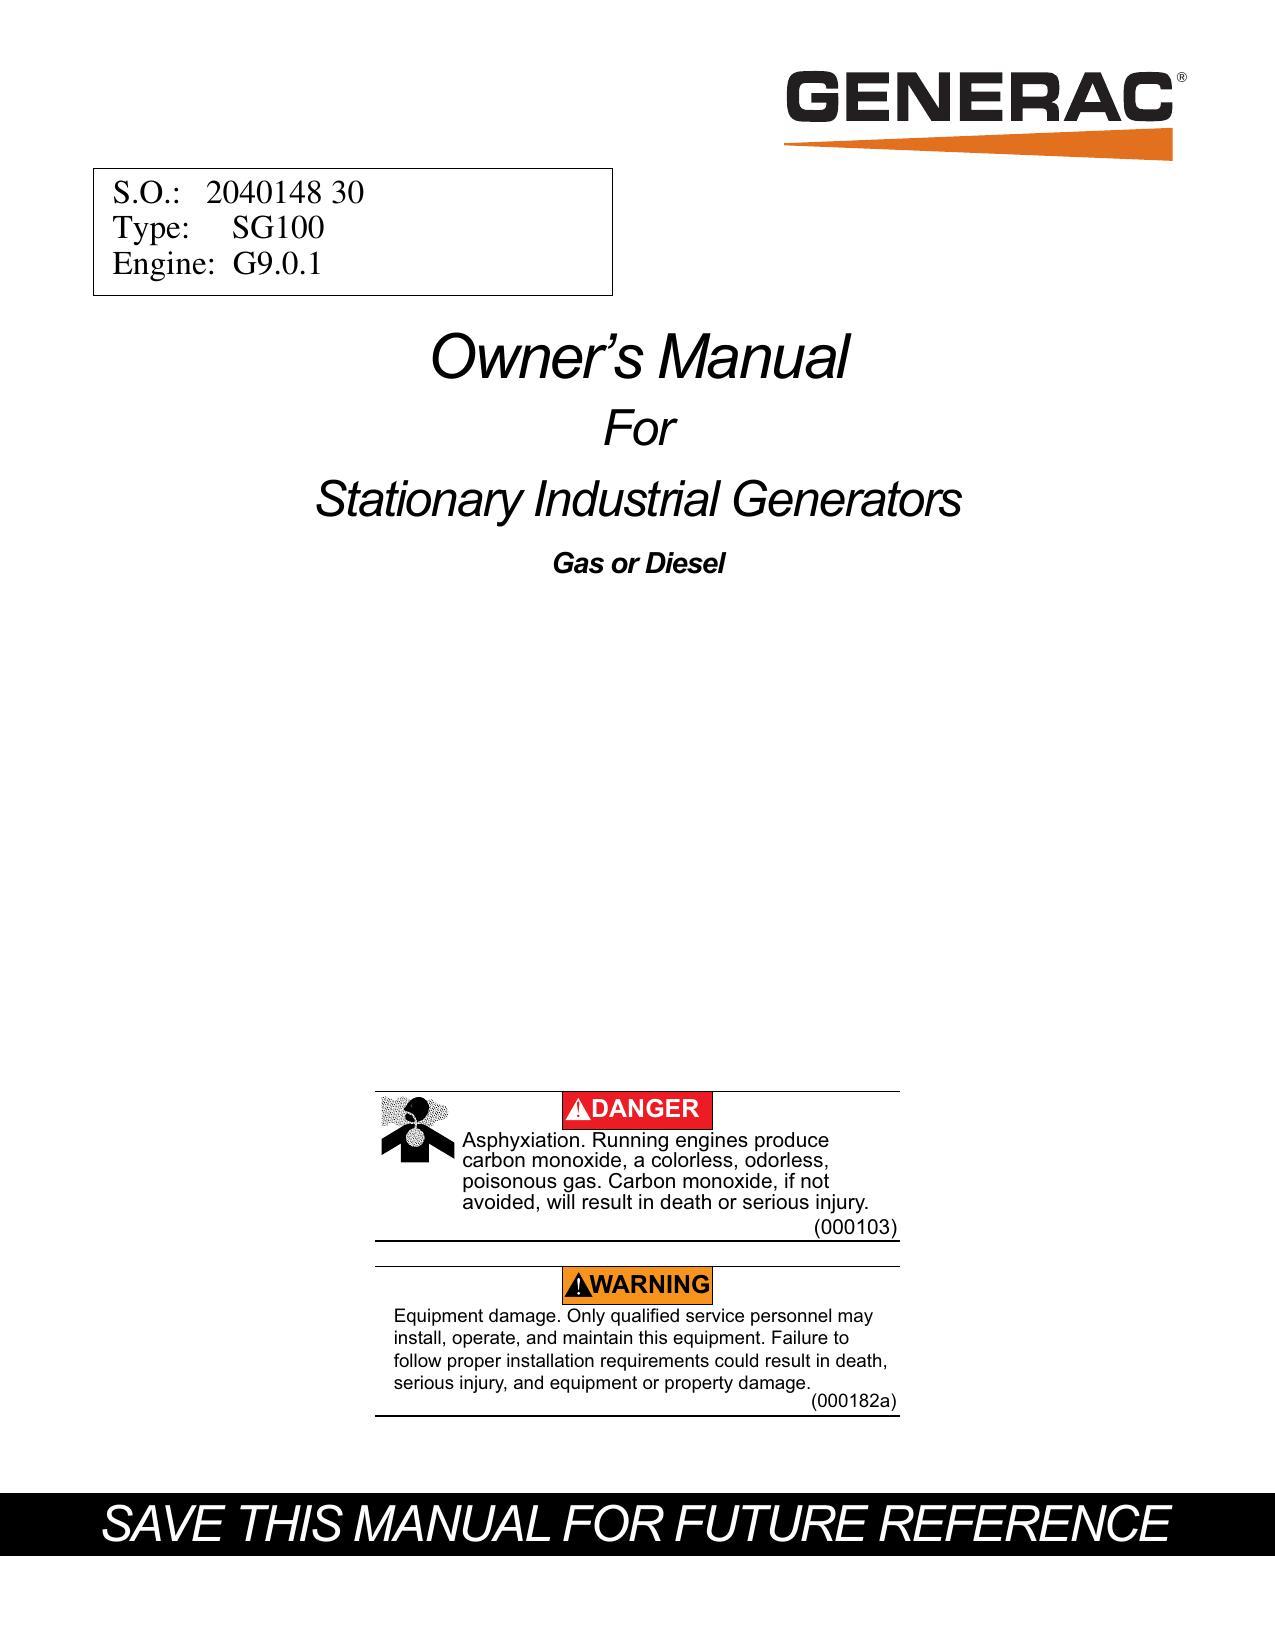 owners-manual-for-stationary-industrial-generators.pdf